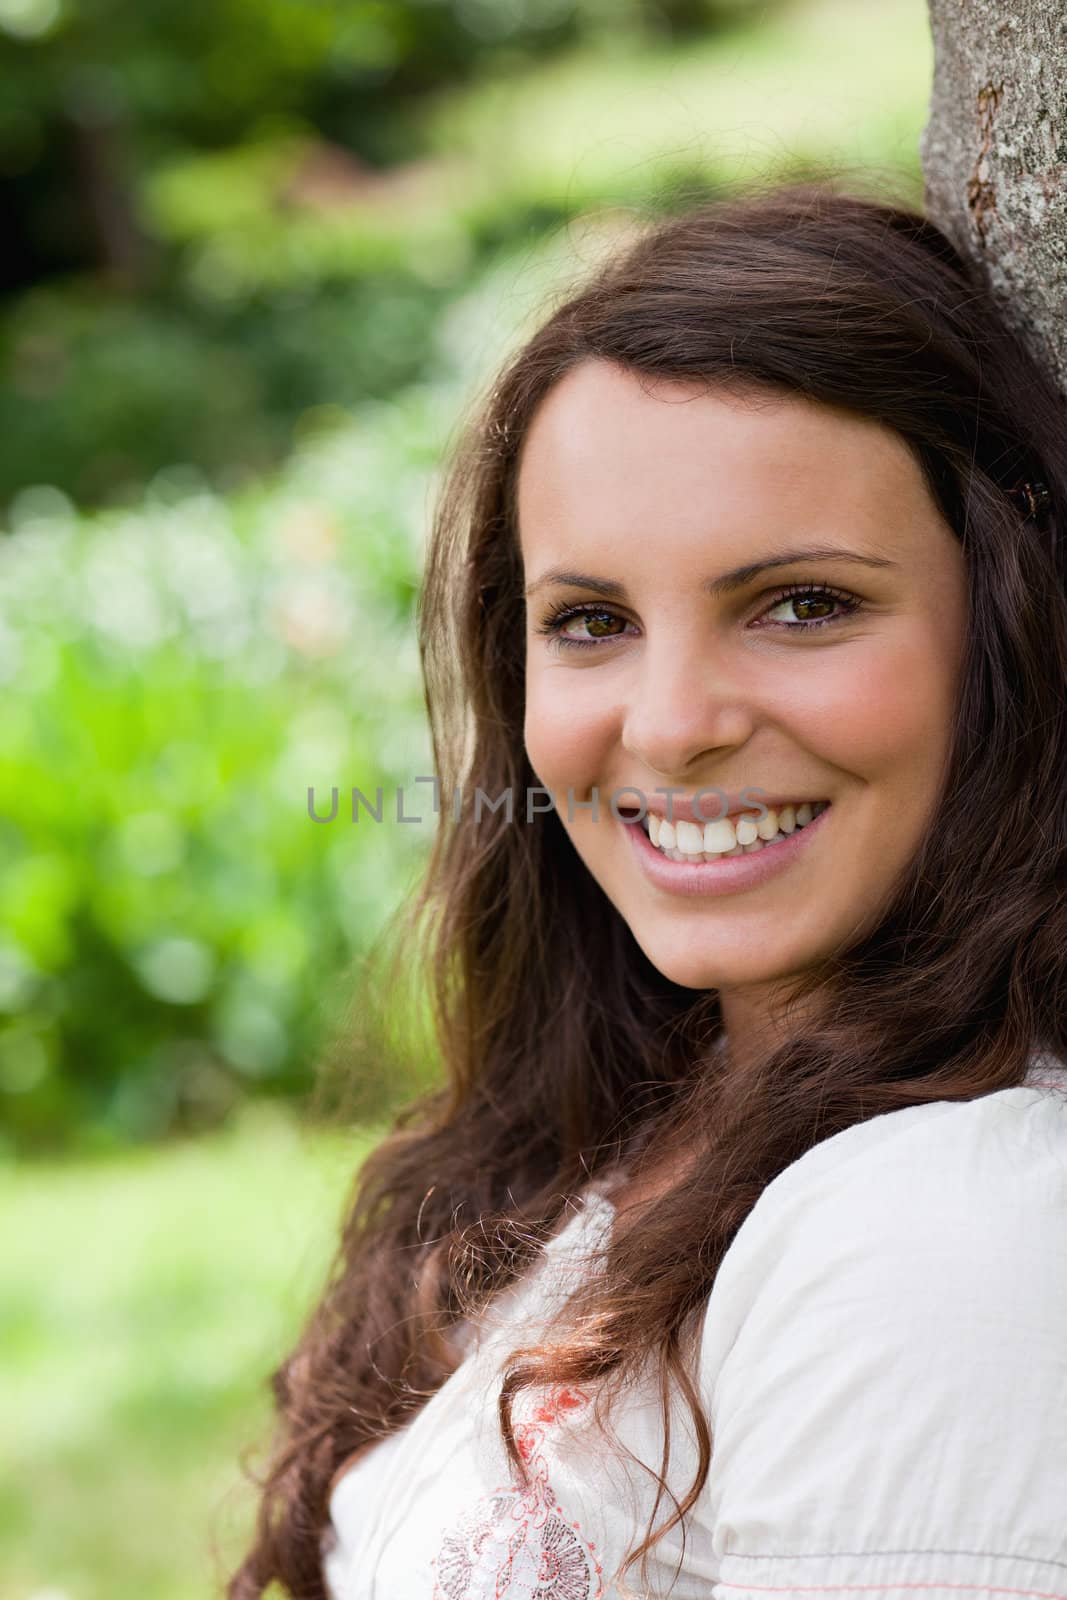 Young woman leaning against a tree in the countryside while showing a great smile